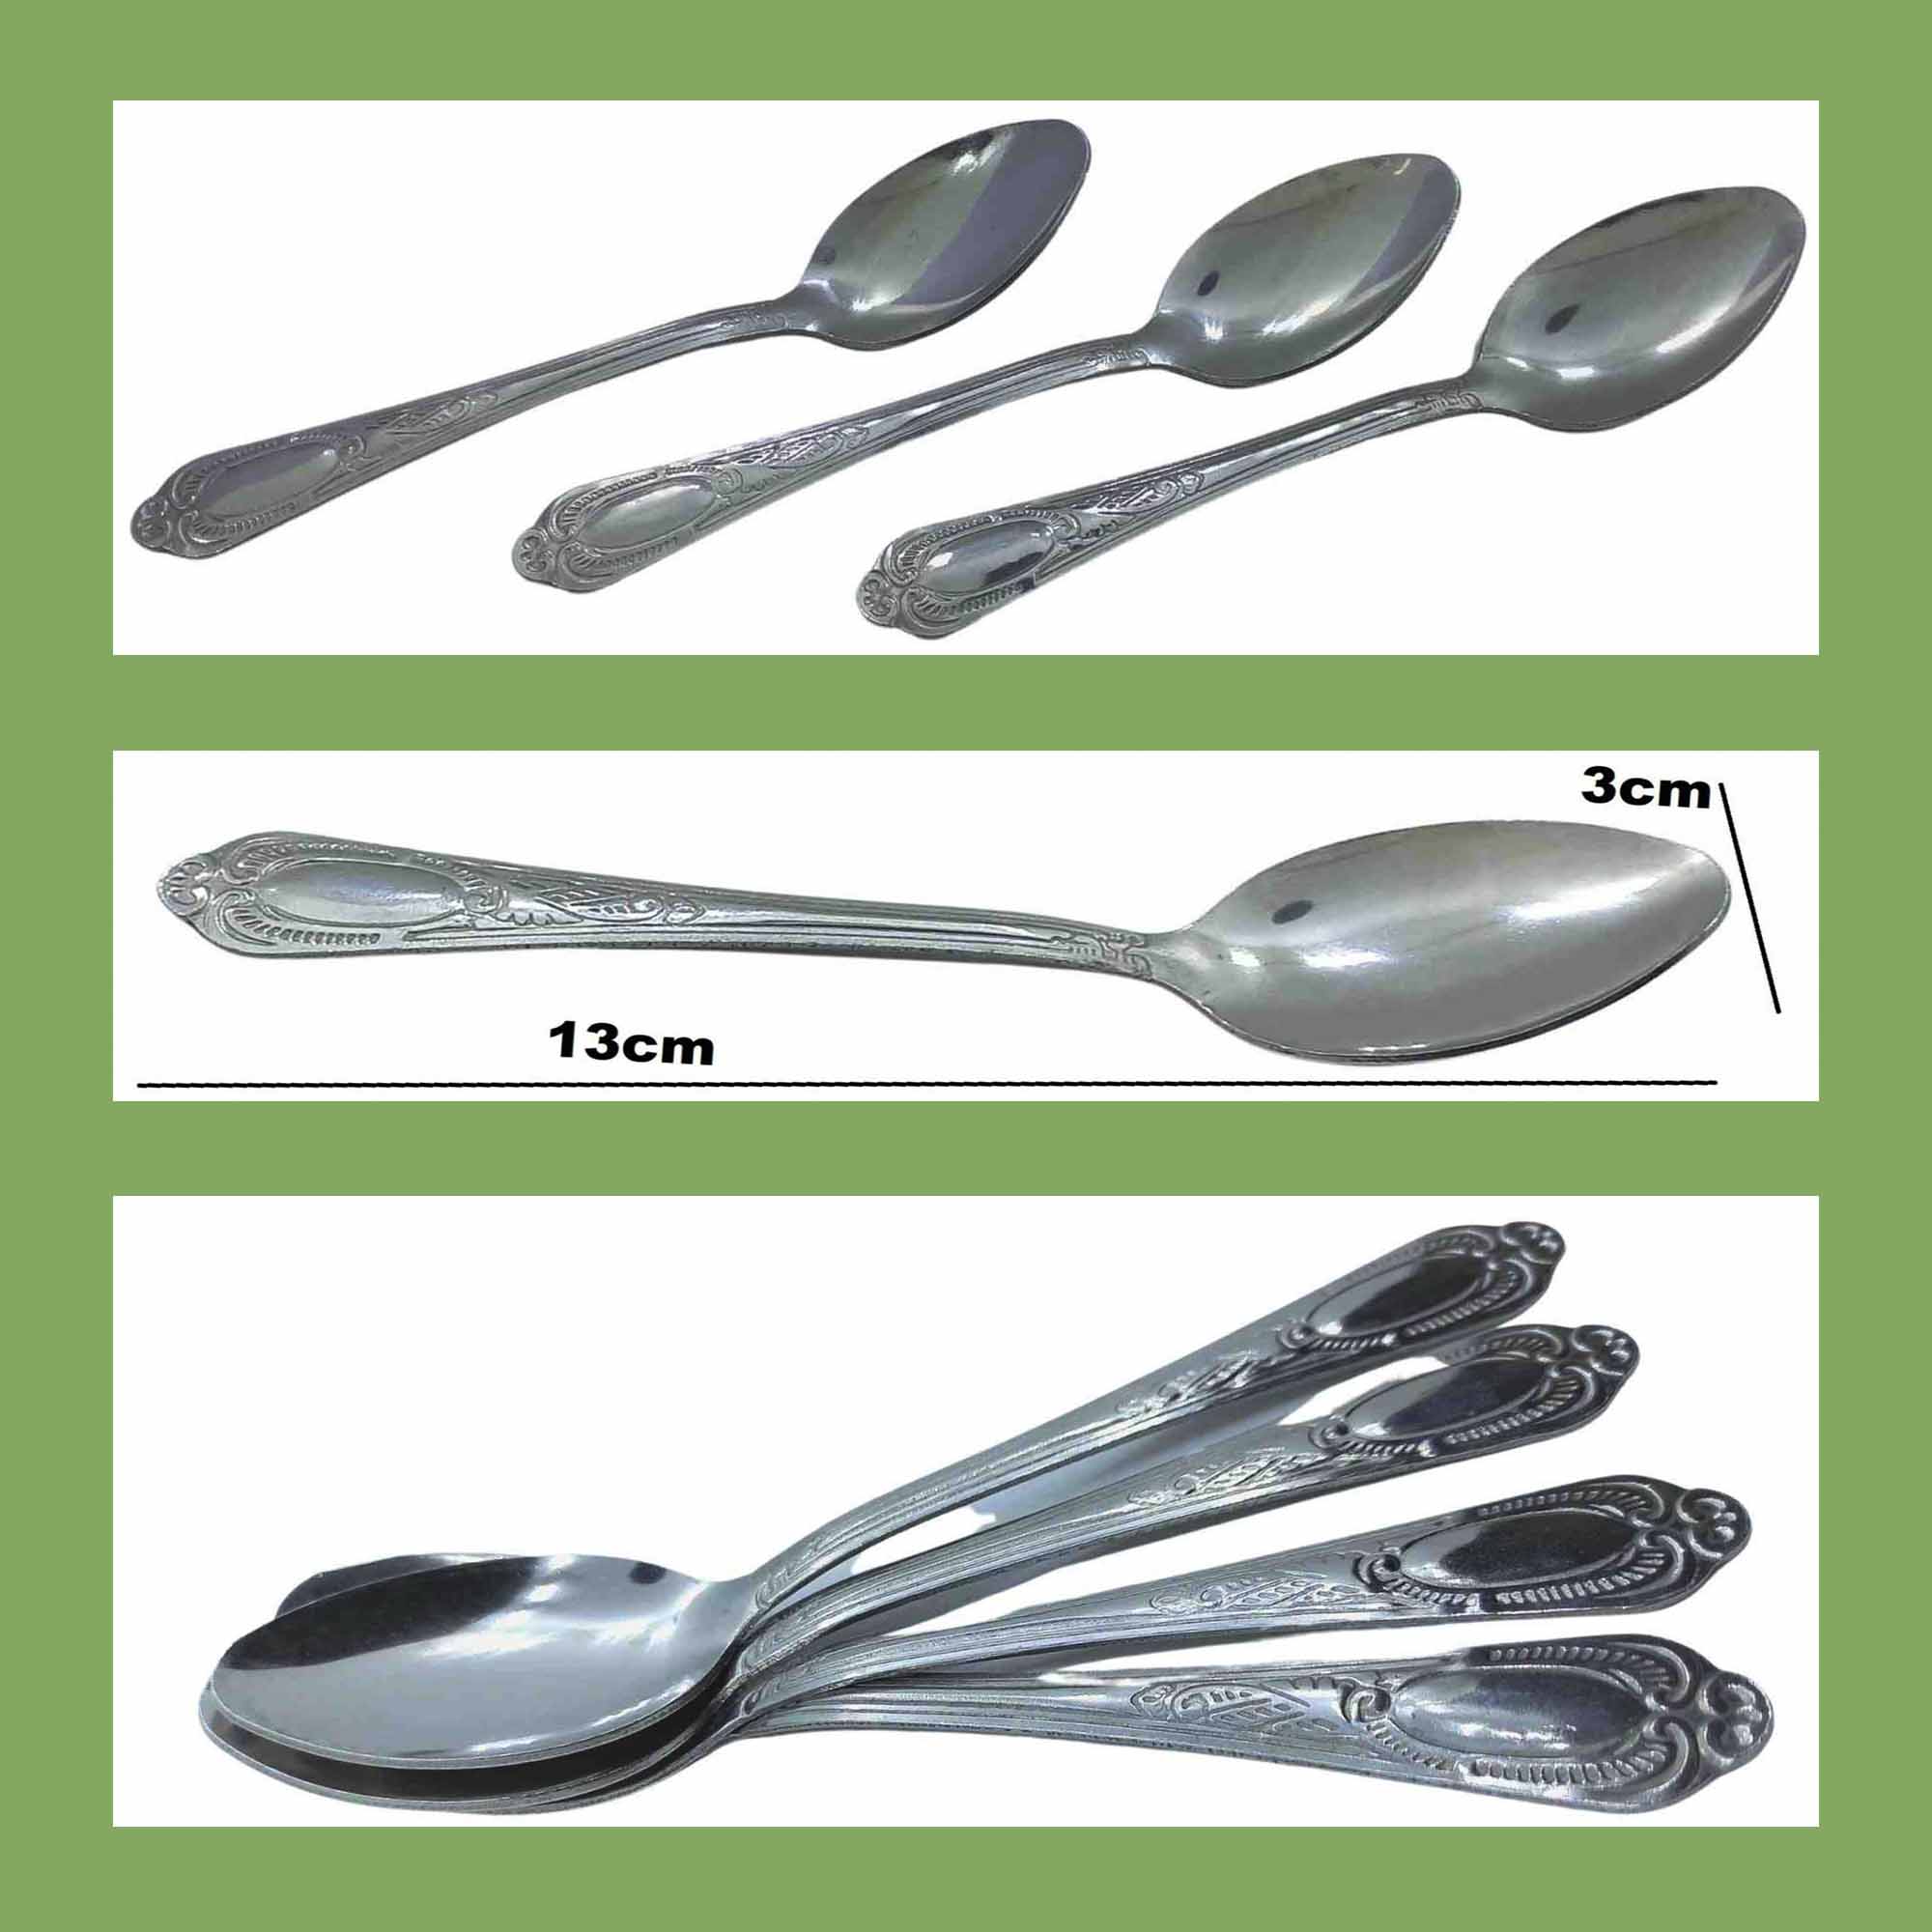 Table & tea Spoons Made of Stainless Steel - Stylish Cutlery (Floral)